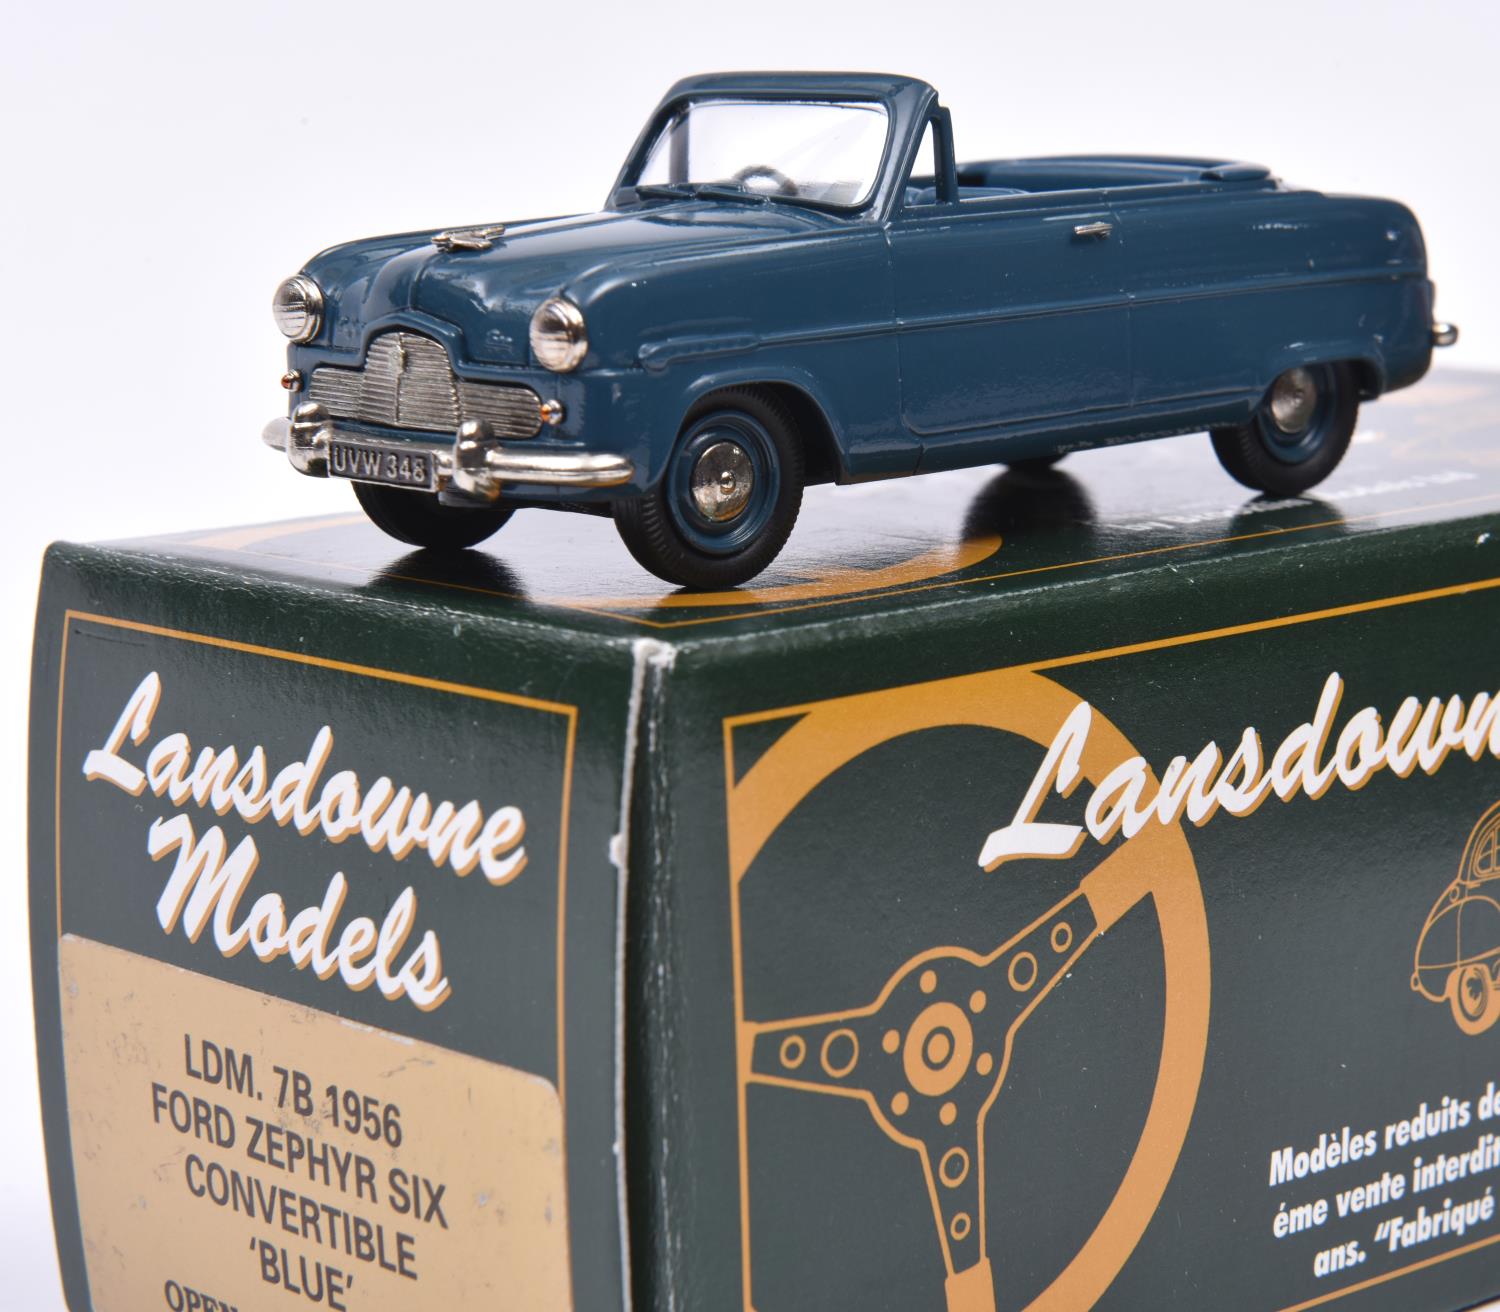 Lansdowne Models LDM.7B 1956 Ford Zephyr Six Convertible. In blue with similar blue interior and